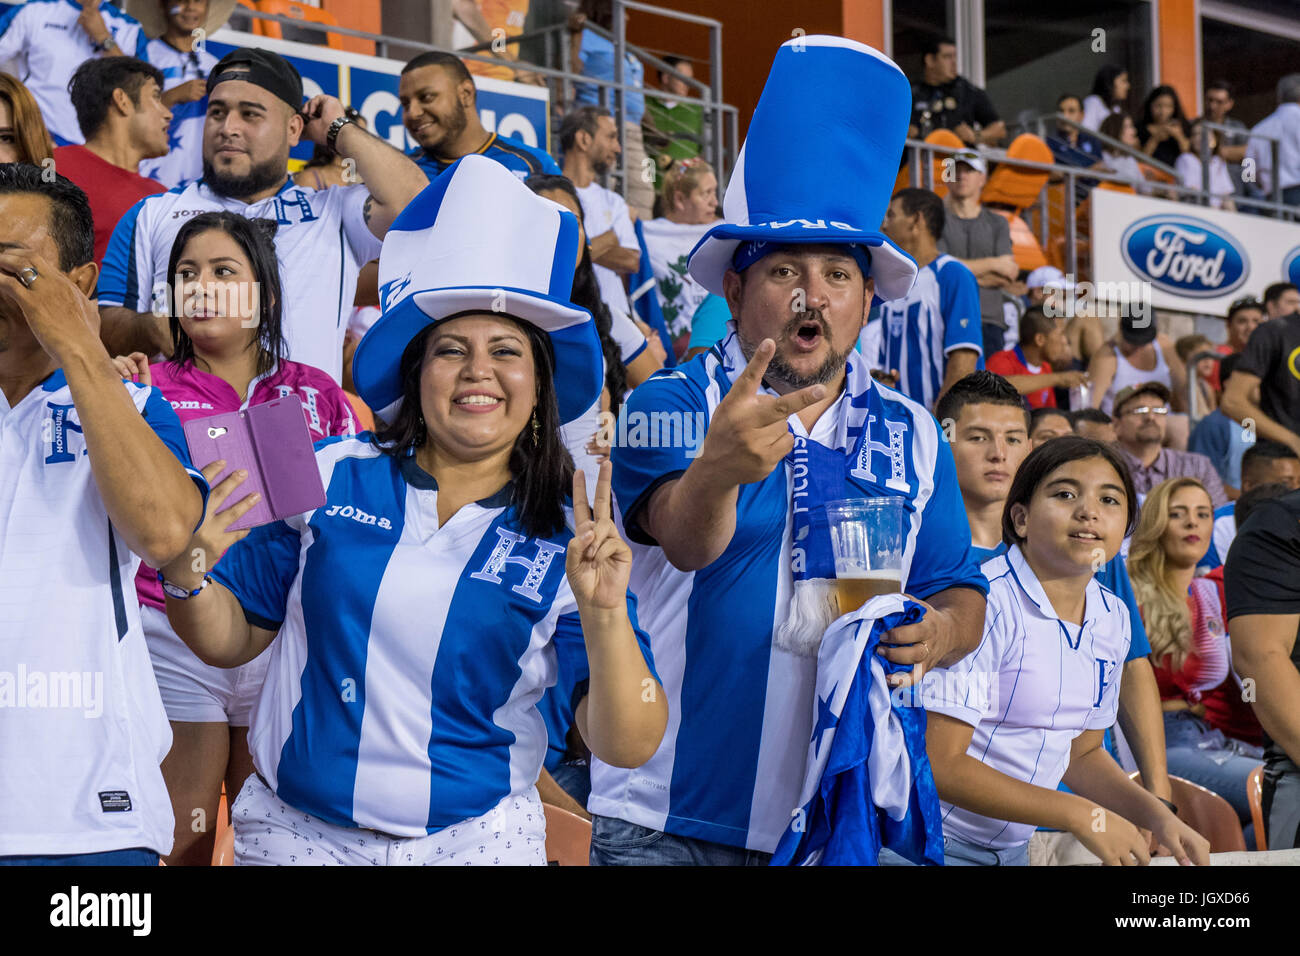 Houston, Texas, USA. 11th July, 2017. Honduras fans at an international CONCACAF Gold Cup soccer match between Honduras and French Guiana at BBVA Compass Stadium in Houston, TX on July 11th, 2017. The game ended in a 0-0 draw. Credit: Trask Smith/ZUMA Wire/Alamy Live News Stock Photo